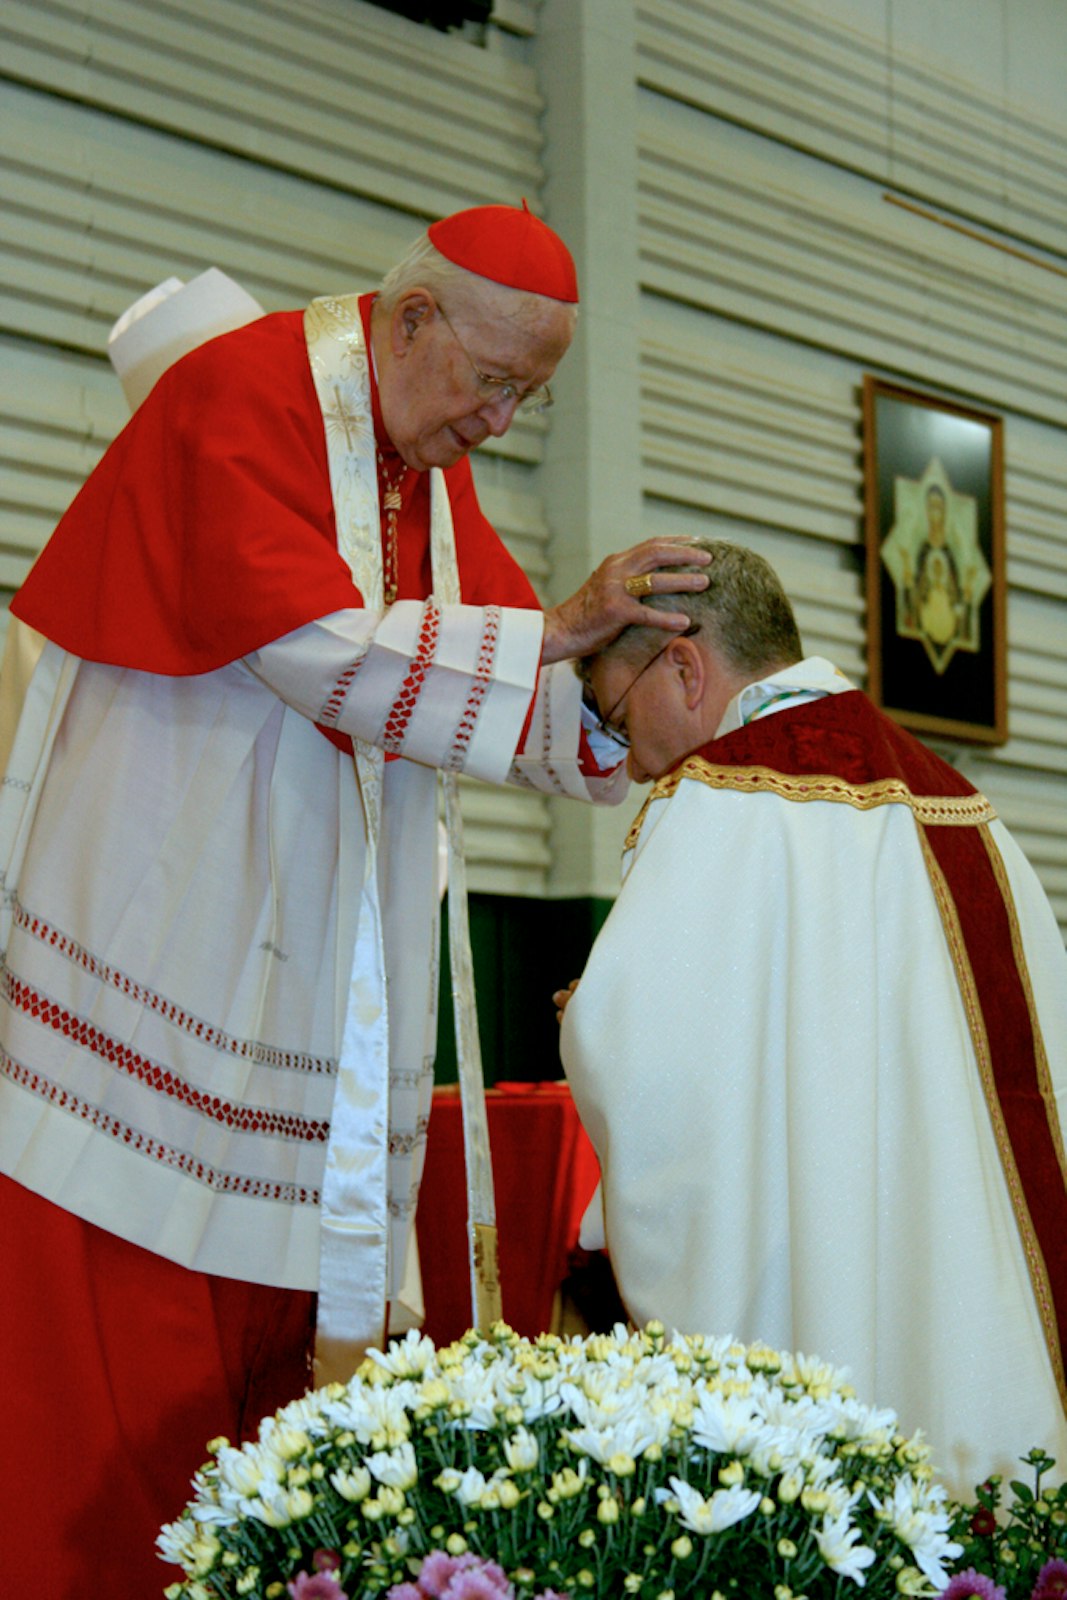 The late Cardinal Edmund C. Szoka, who served as Detroit's archbishop in the 1980s, lays his hands on Bishop Monforton's head during Bishop Monforton's episcopal consecration Mass on Sept. 10, 2012, at the Franciscan University of Steubenville, Ohio.